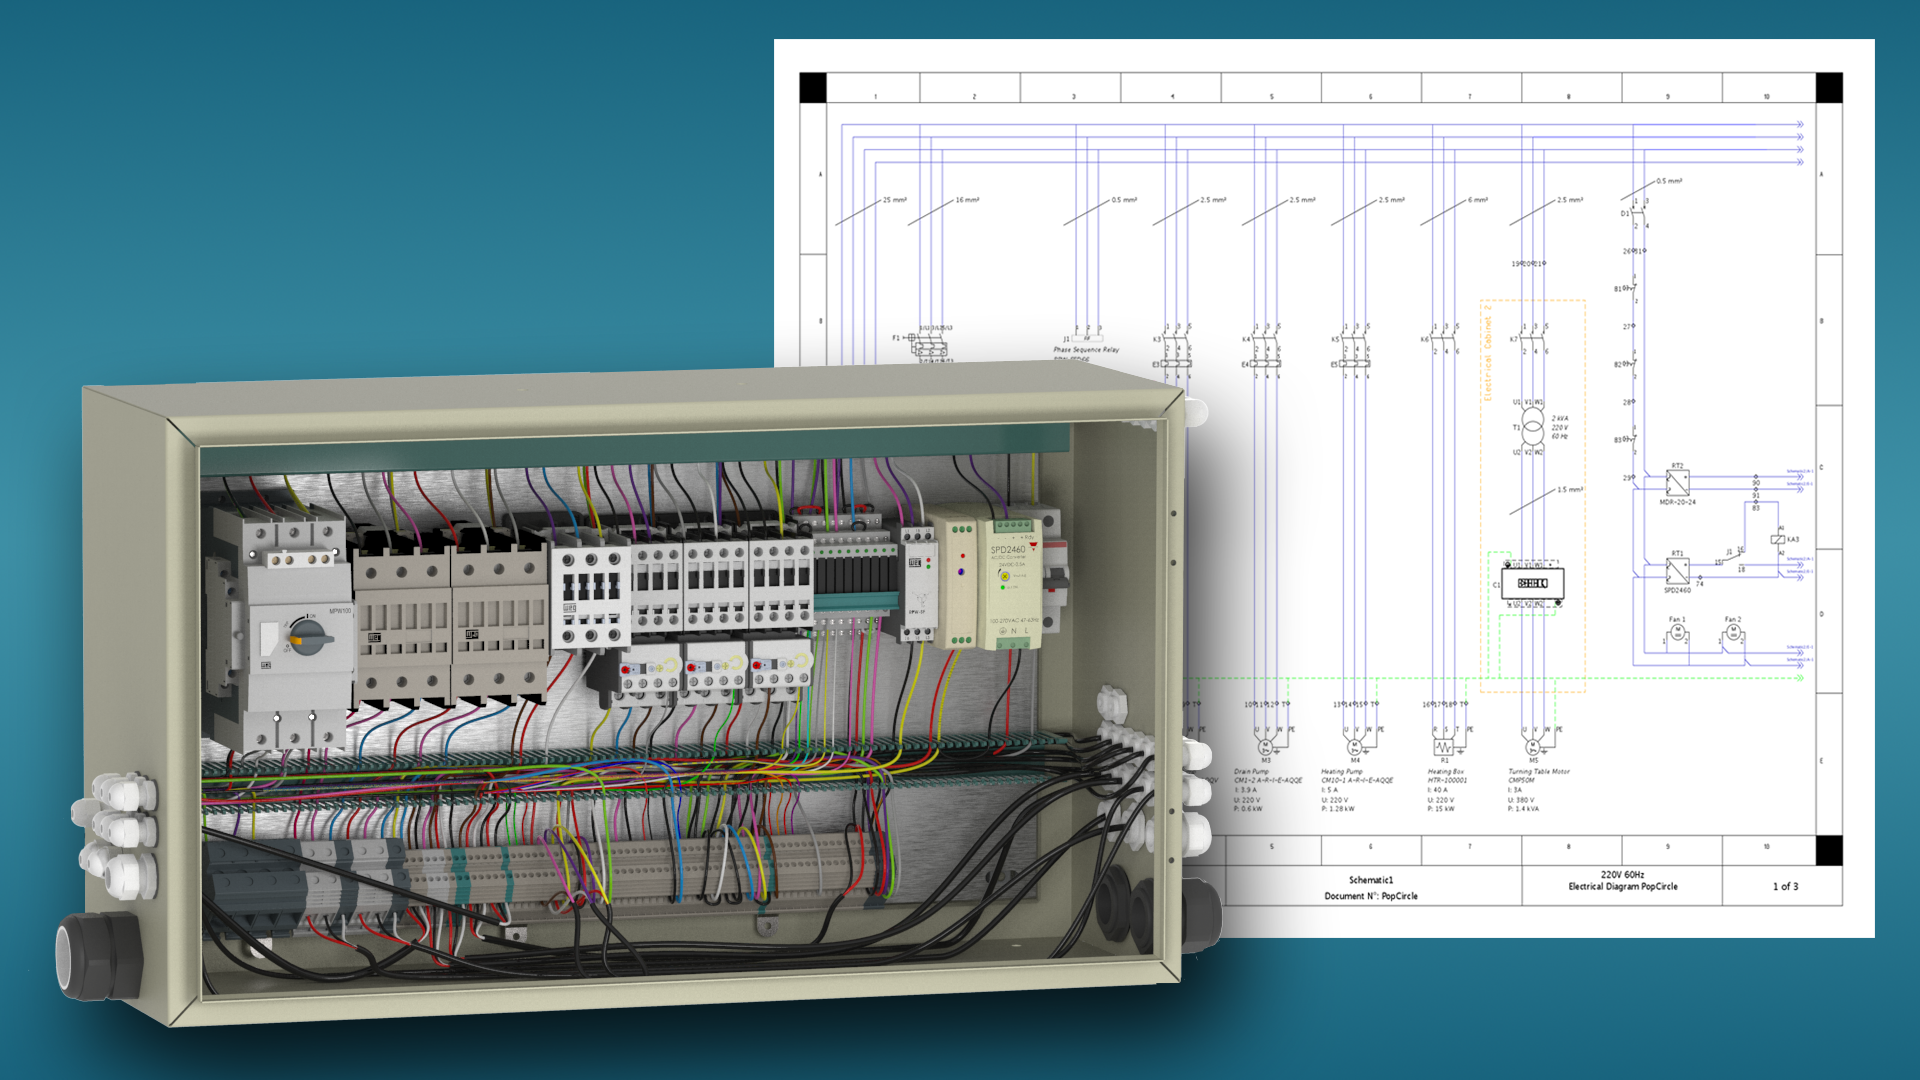 Wiring Design | Electrical Circuit | Schematics | Solid Edge  Basic Electrical Design Of A Plc Panel Wiring Diagrams    Solid Edge - Siemens